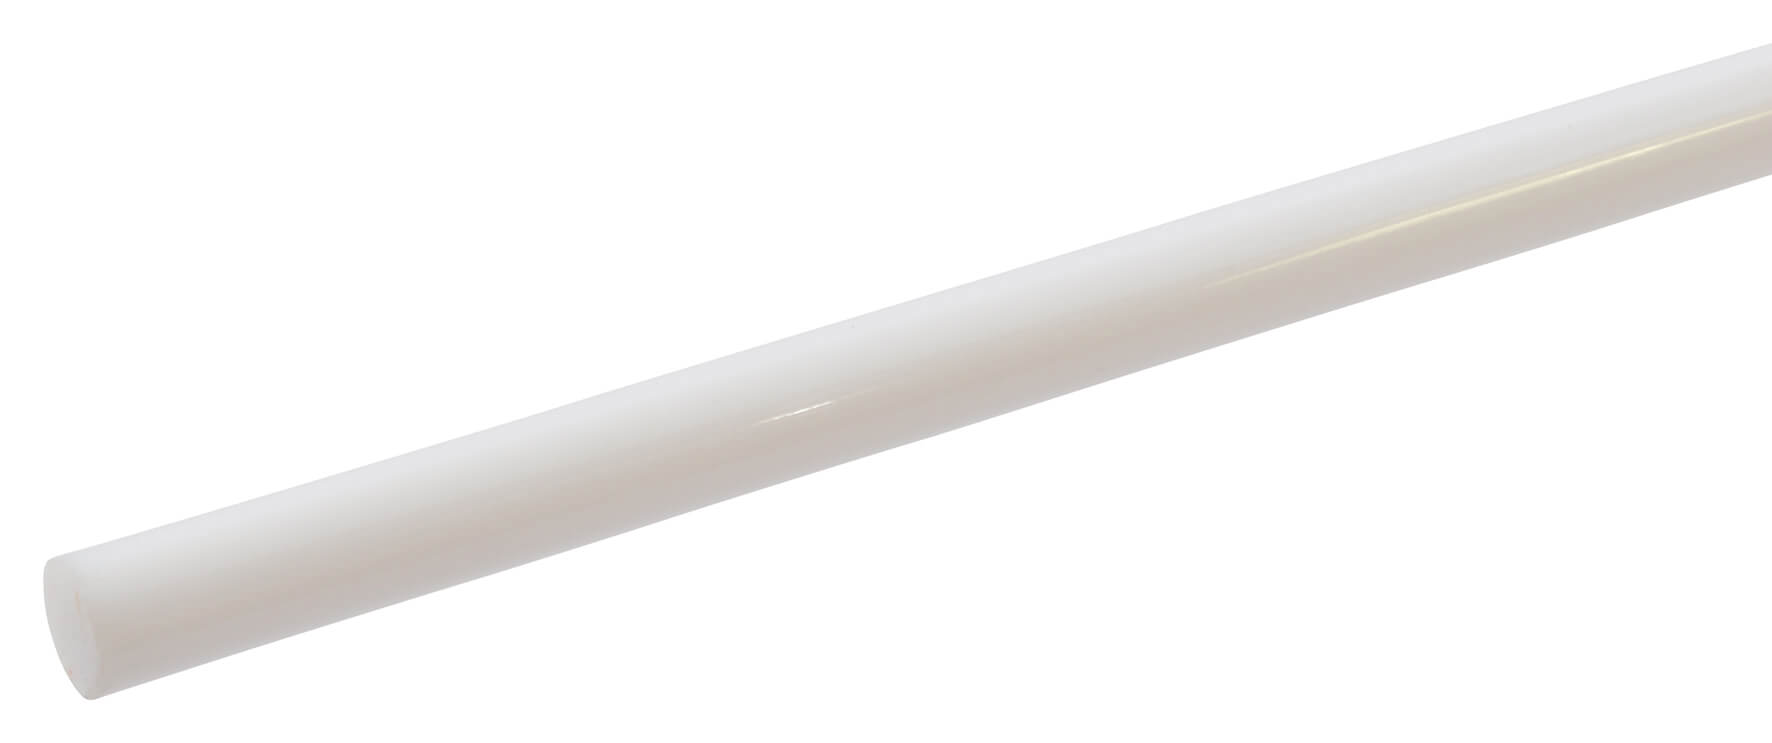 Acrylic Rod 6.4mm x 610mm - Solid White